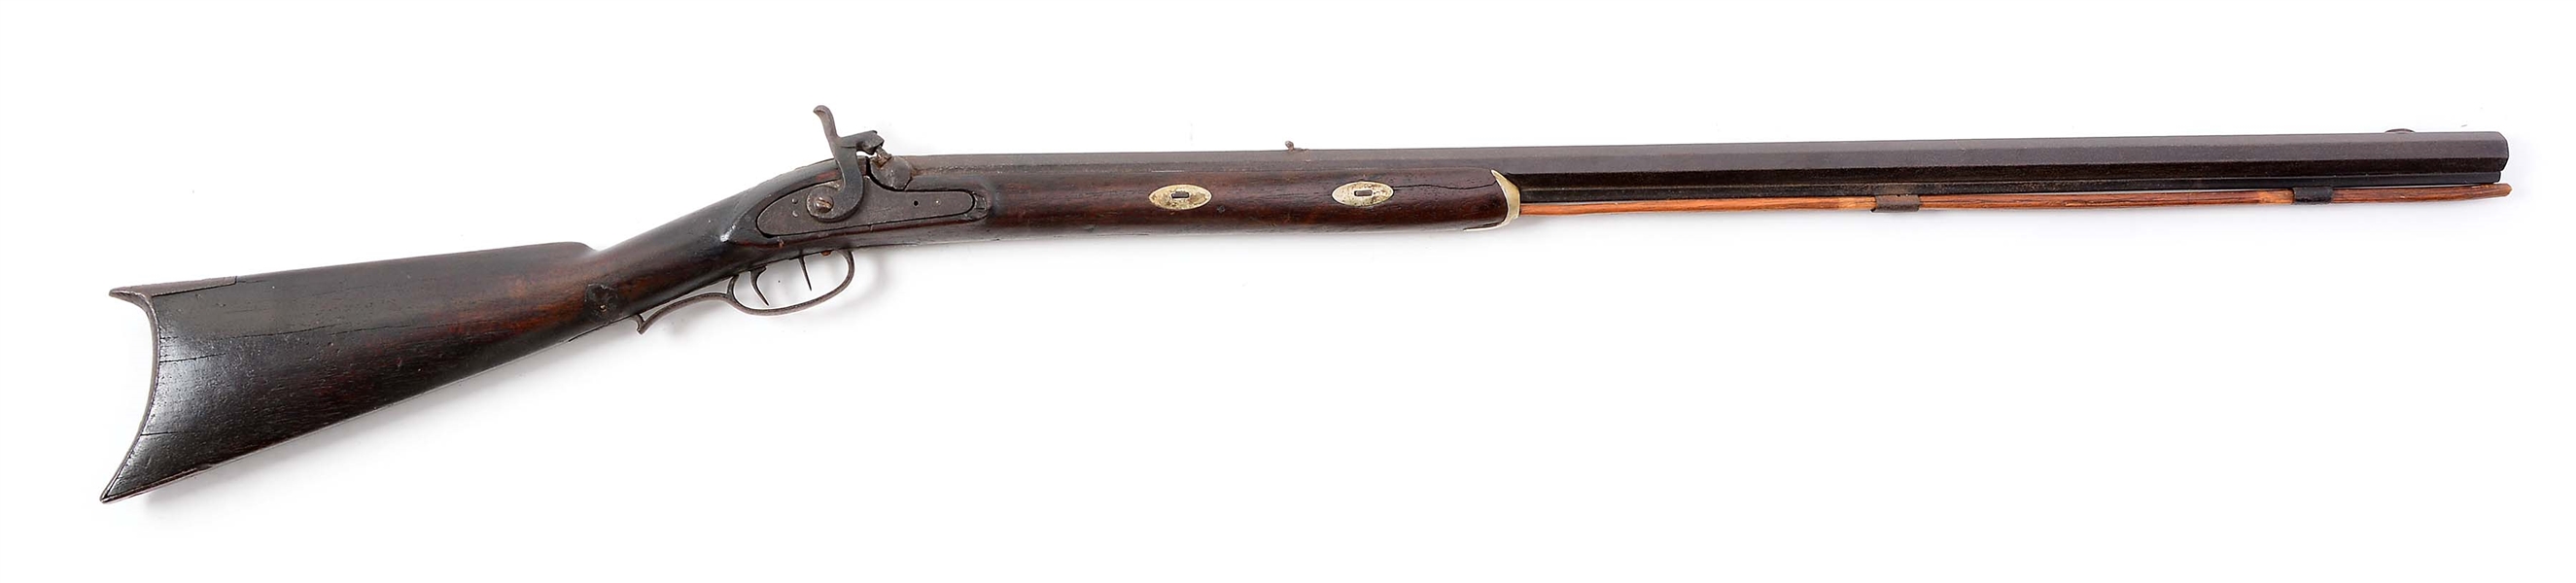 (A) HALF STOCK PERCUSSION RIFLE STAMPED J. HENRY & SON.